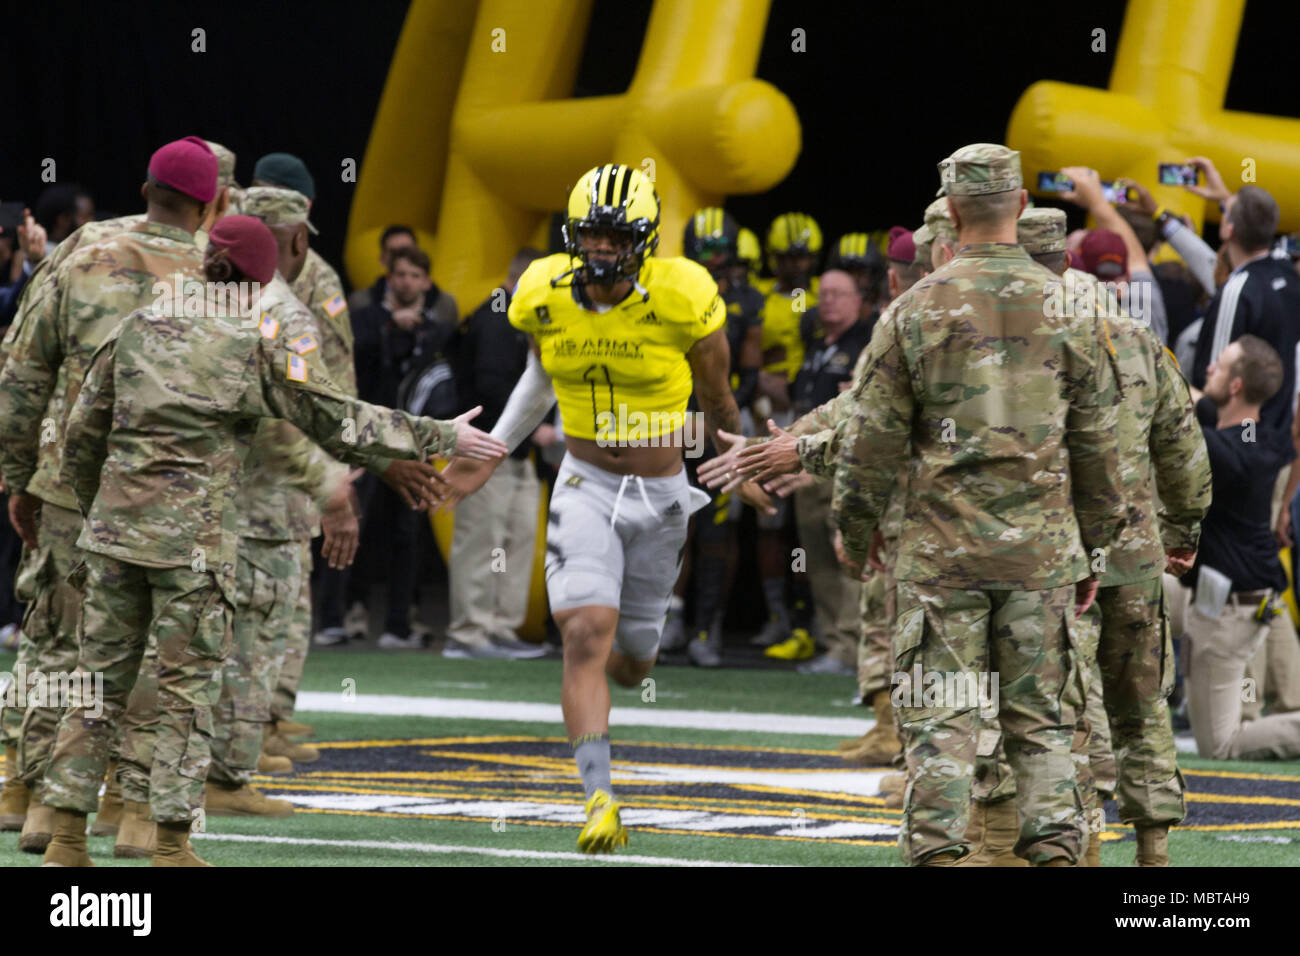 Jaiden Woodbey, an athlete from St. John Boscoe High School in Bellflower, Calif., runs out onto the field during the pre-game events at the U.S. Army All-American Bowl Jan. 6, 2018, in San Antonio, Texas. The All-American Bowl is the nation’s premier high school football game, serving as the preeminent launching pad for America’s future college and National Football League stars. (U.S. Army photo by Sgt. Ian Valley, 345th Public Affairs Detachment/Released) Stock Photo